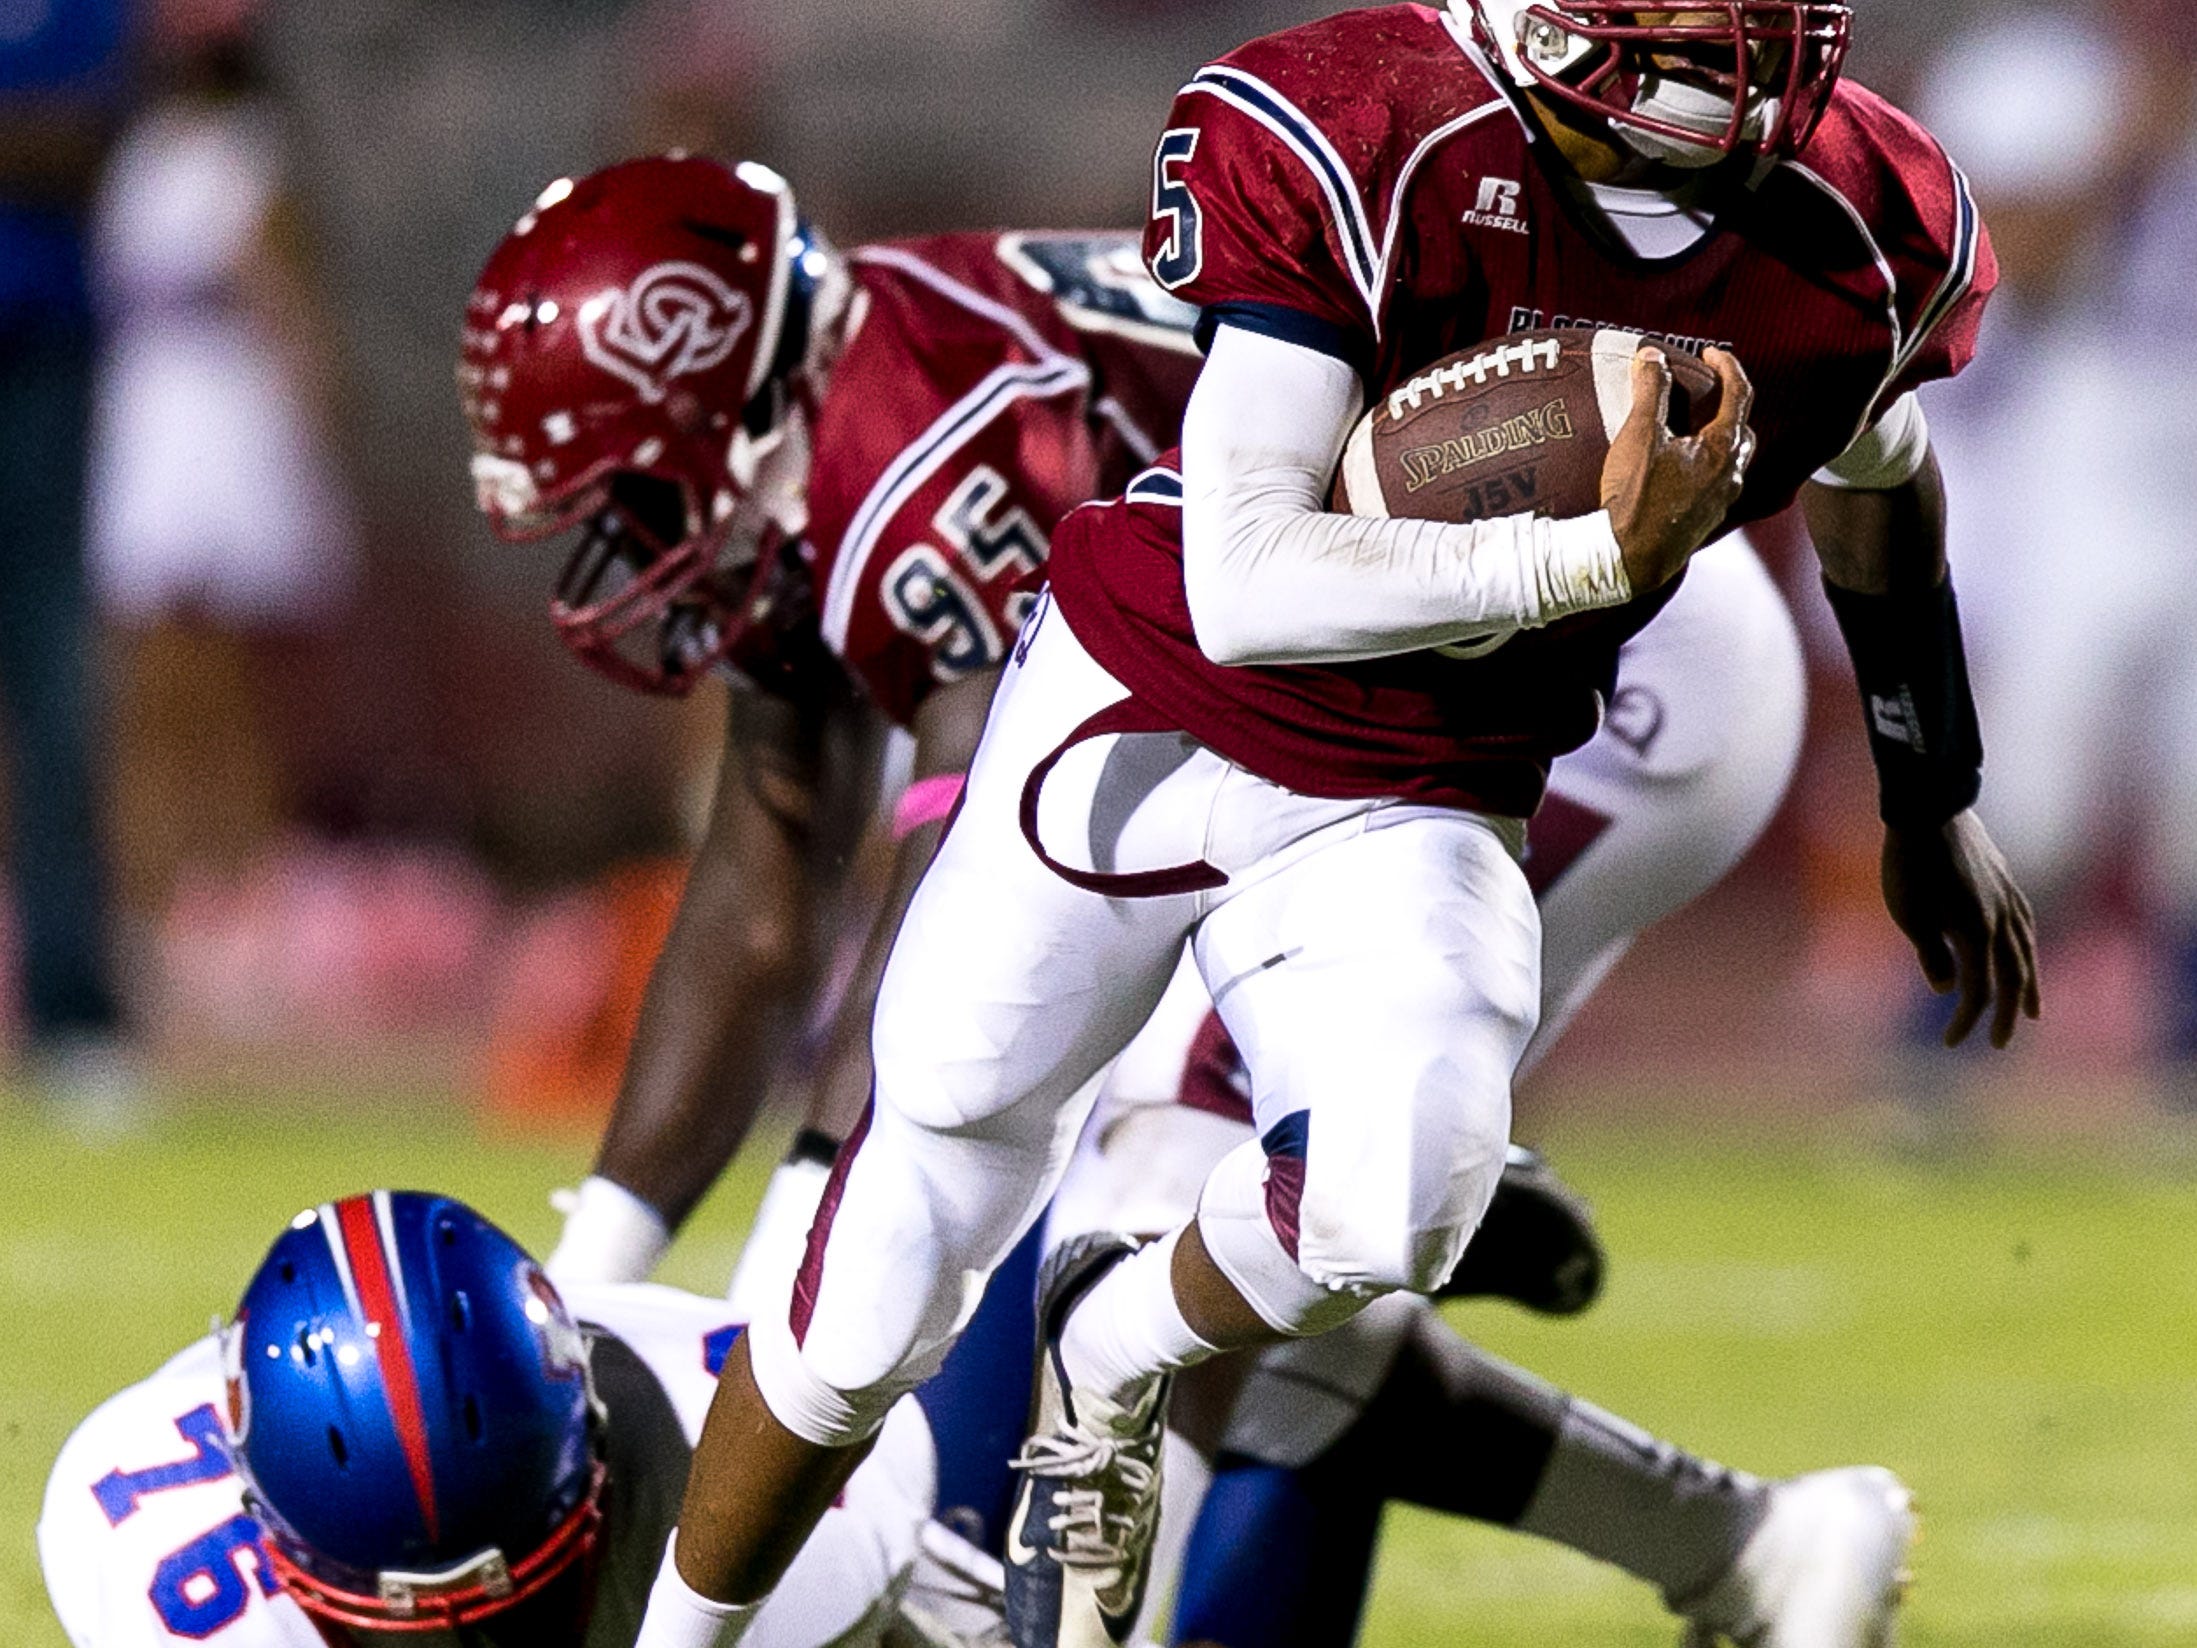 La Quinta's Eric Pascascio (No. 5) runs for a touchdown in the first half against Indio during a DVL football game held at La Quinta High School, Friday evening, October 3, 2014. Photo by Gerry Maceda, Special to The Desert Sun